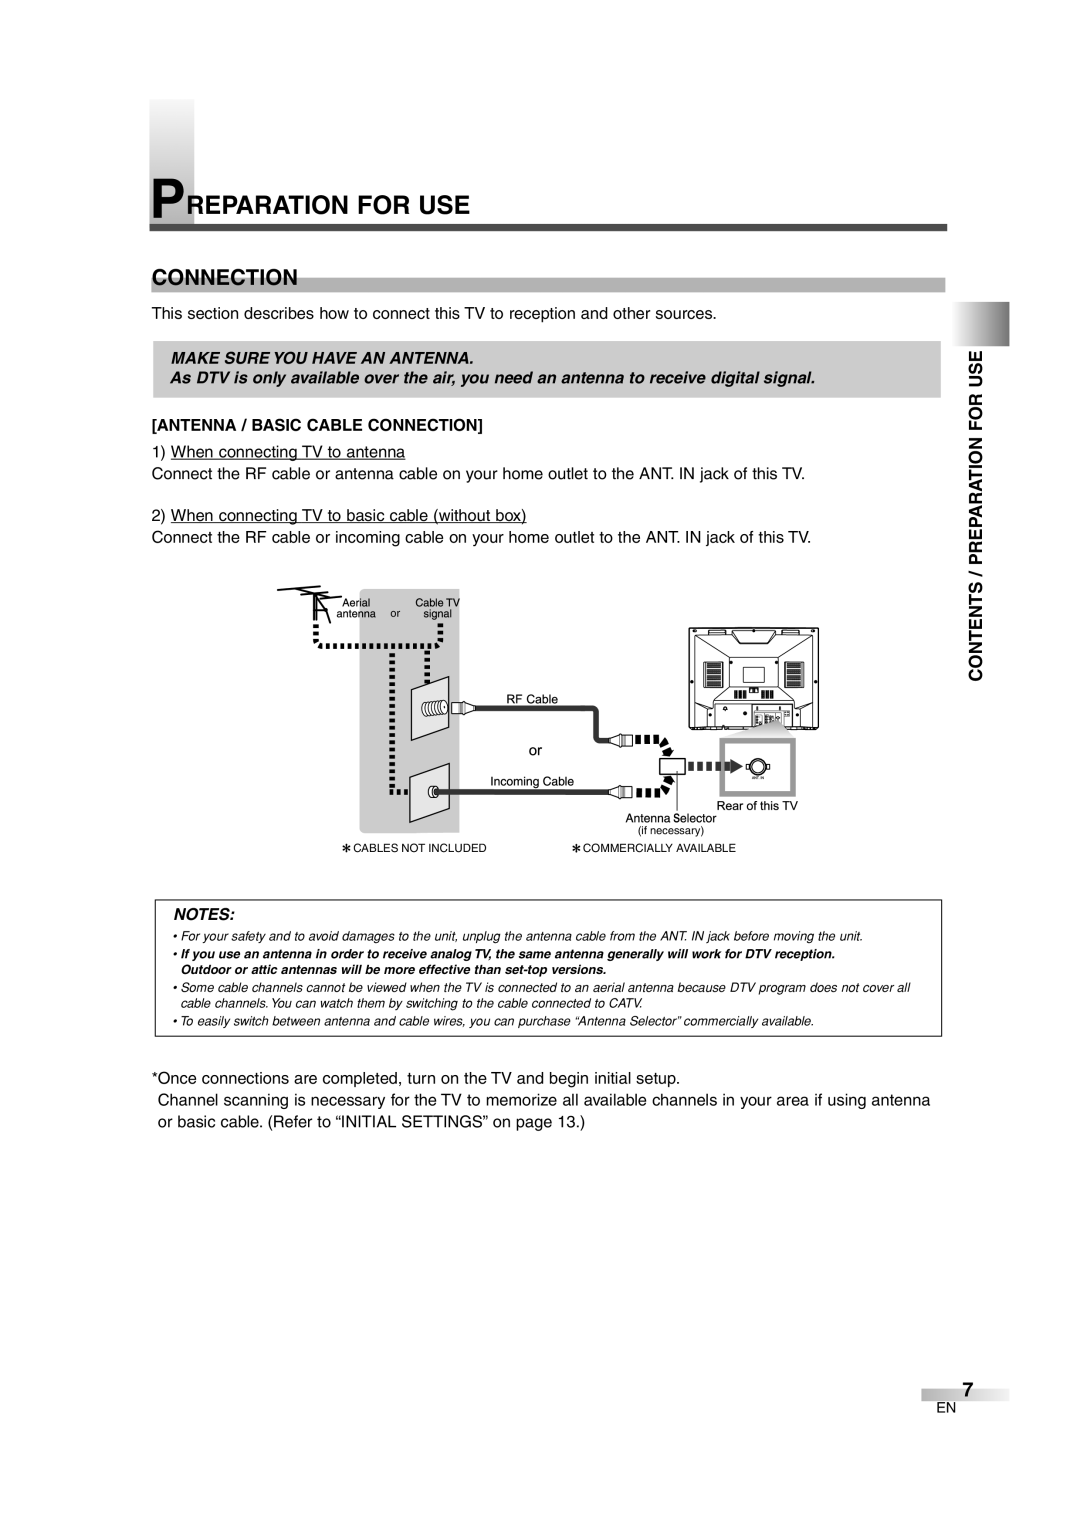 Sylvania SSGF4276 owner manual Preparation For Use, Make Sure You Have An Antenna, Antenna / Basic Cable Connection 